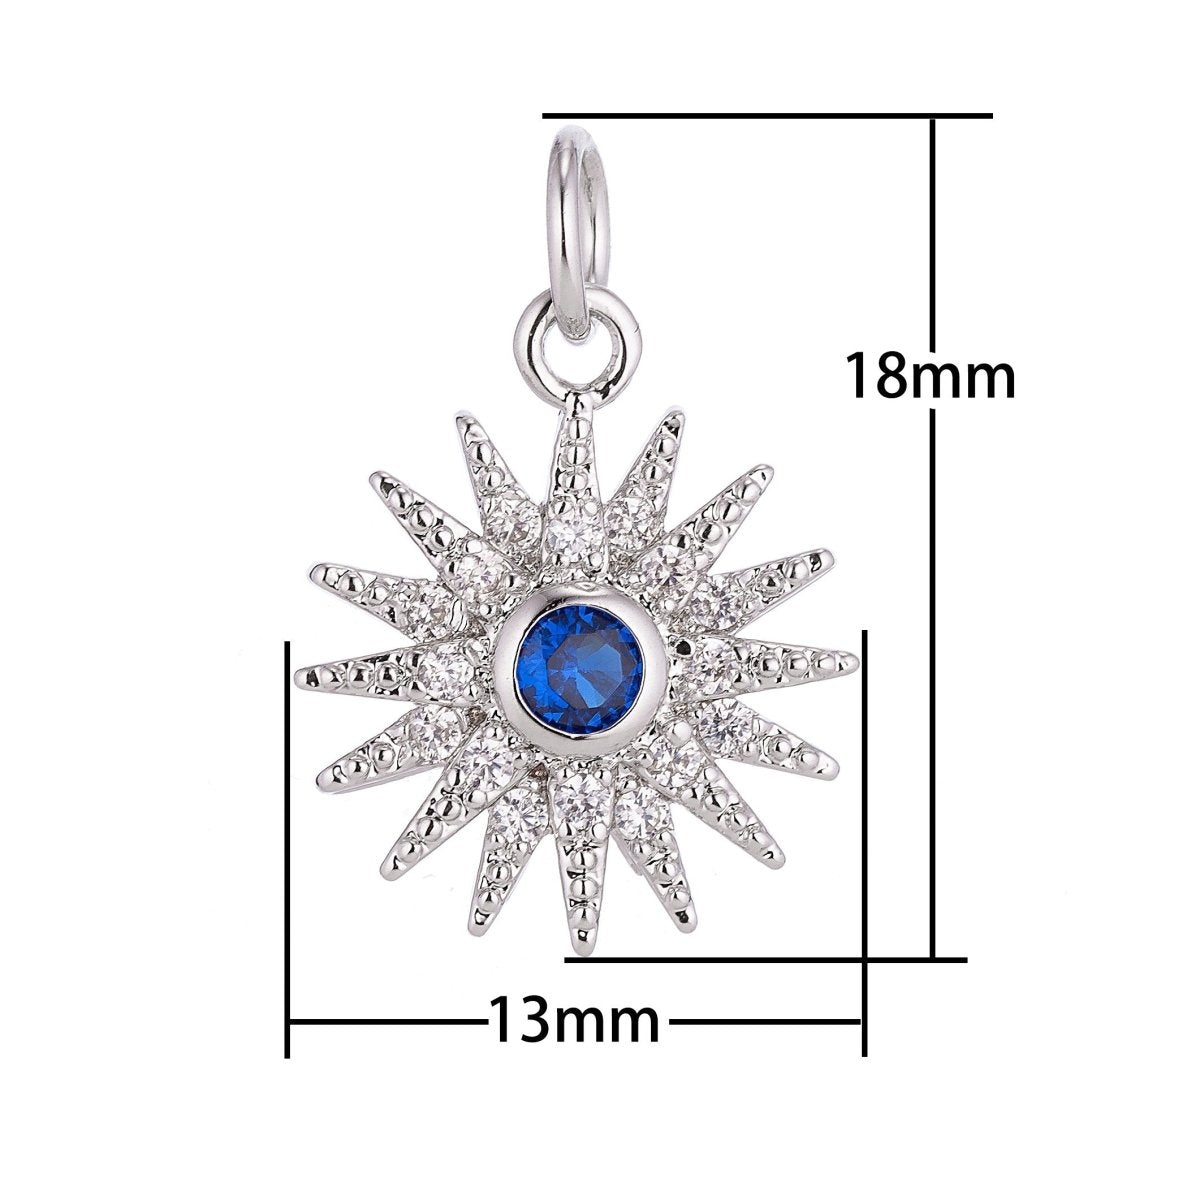 Gold Filled Shining Sun, Bright Sunny Day, Cubic Zirconia Charm Necklace Pendant Findings for Jewelry Making C-048 - DLUXCA